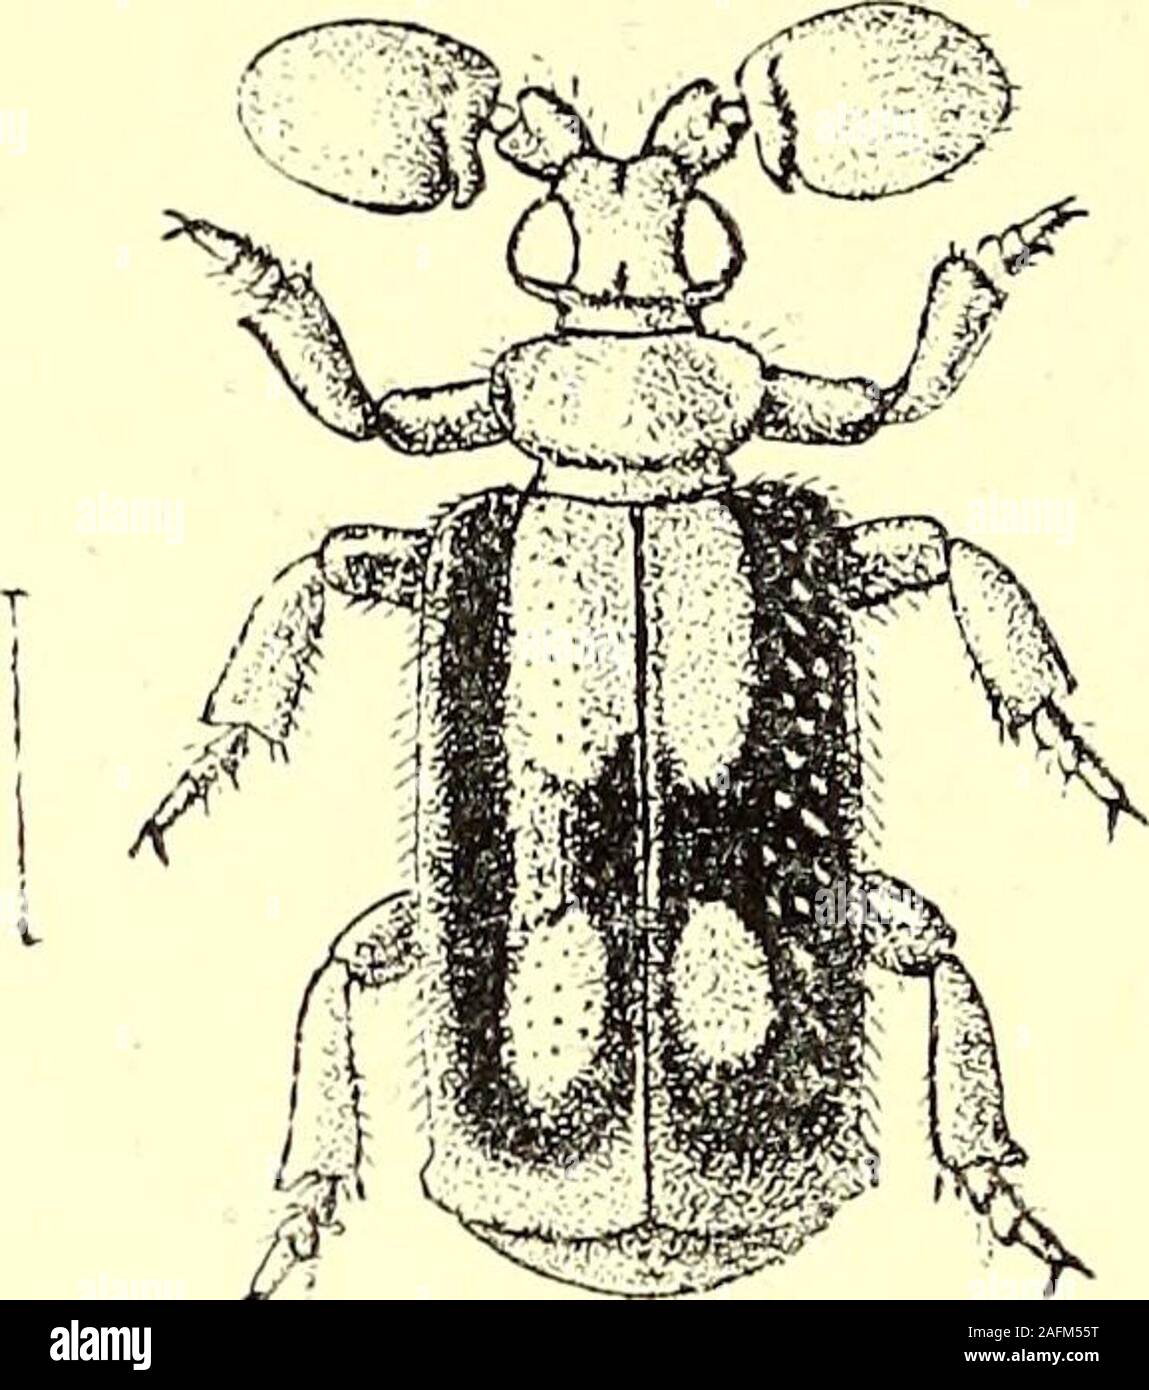 . Coleoptera : general introduction and Cicindelidae and Paussidae. millim. Tbdia (no locality given). According to Westwood P. unicolor differs from P. dentkomis inits uniform colour, in having the front of the head apparentlyrounded, in the suddenly coarctate base of the pronotum (this,however, is a strongly marked character of P. dentkomis), andin the short transverse median stria of the same ; the charactersare not, however, sufficiently marked to separate it specifically. 226. Platyrhopalus cardoni, Wasm. Platyrhopahis cardoni, Wasmann, Notes Leyden Mus. xxv, 1904,p. 19. Besembling P. den Stock Photo